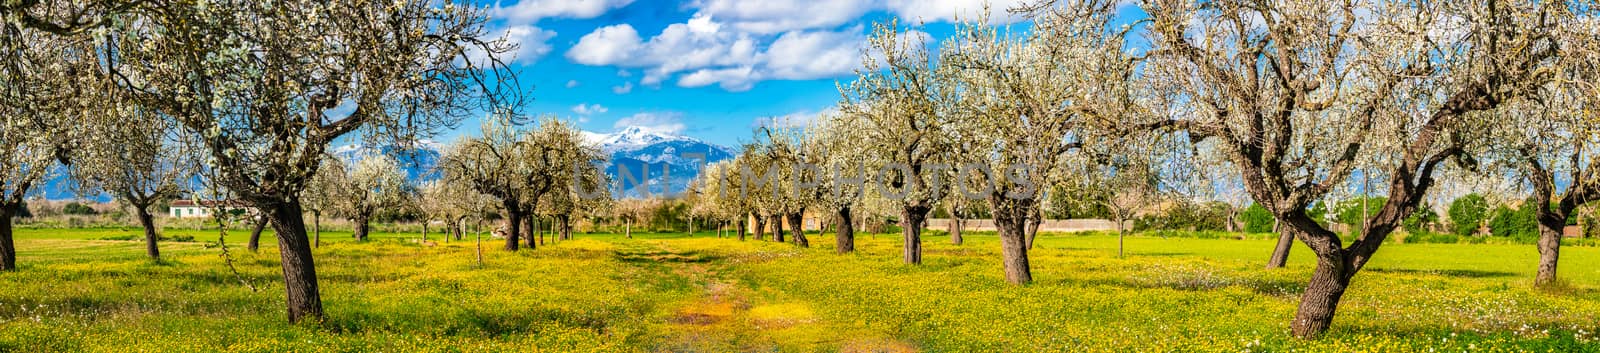 Majorca Spain, beautiful panorama of spring landscape with blooming almond trees by Vulcano